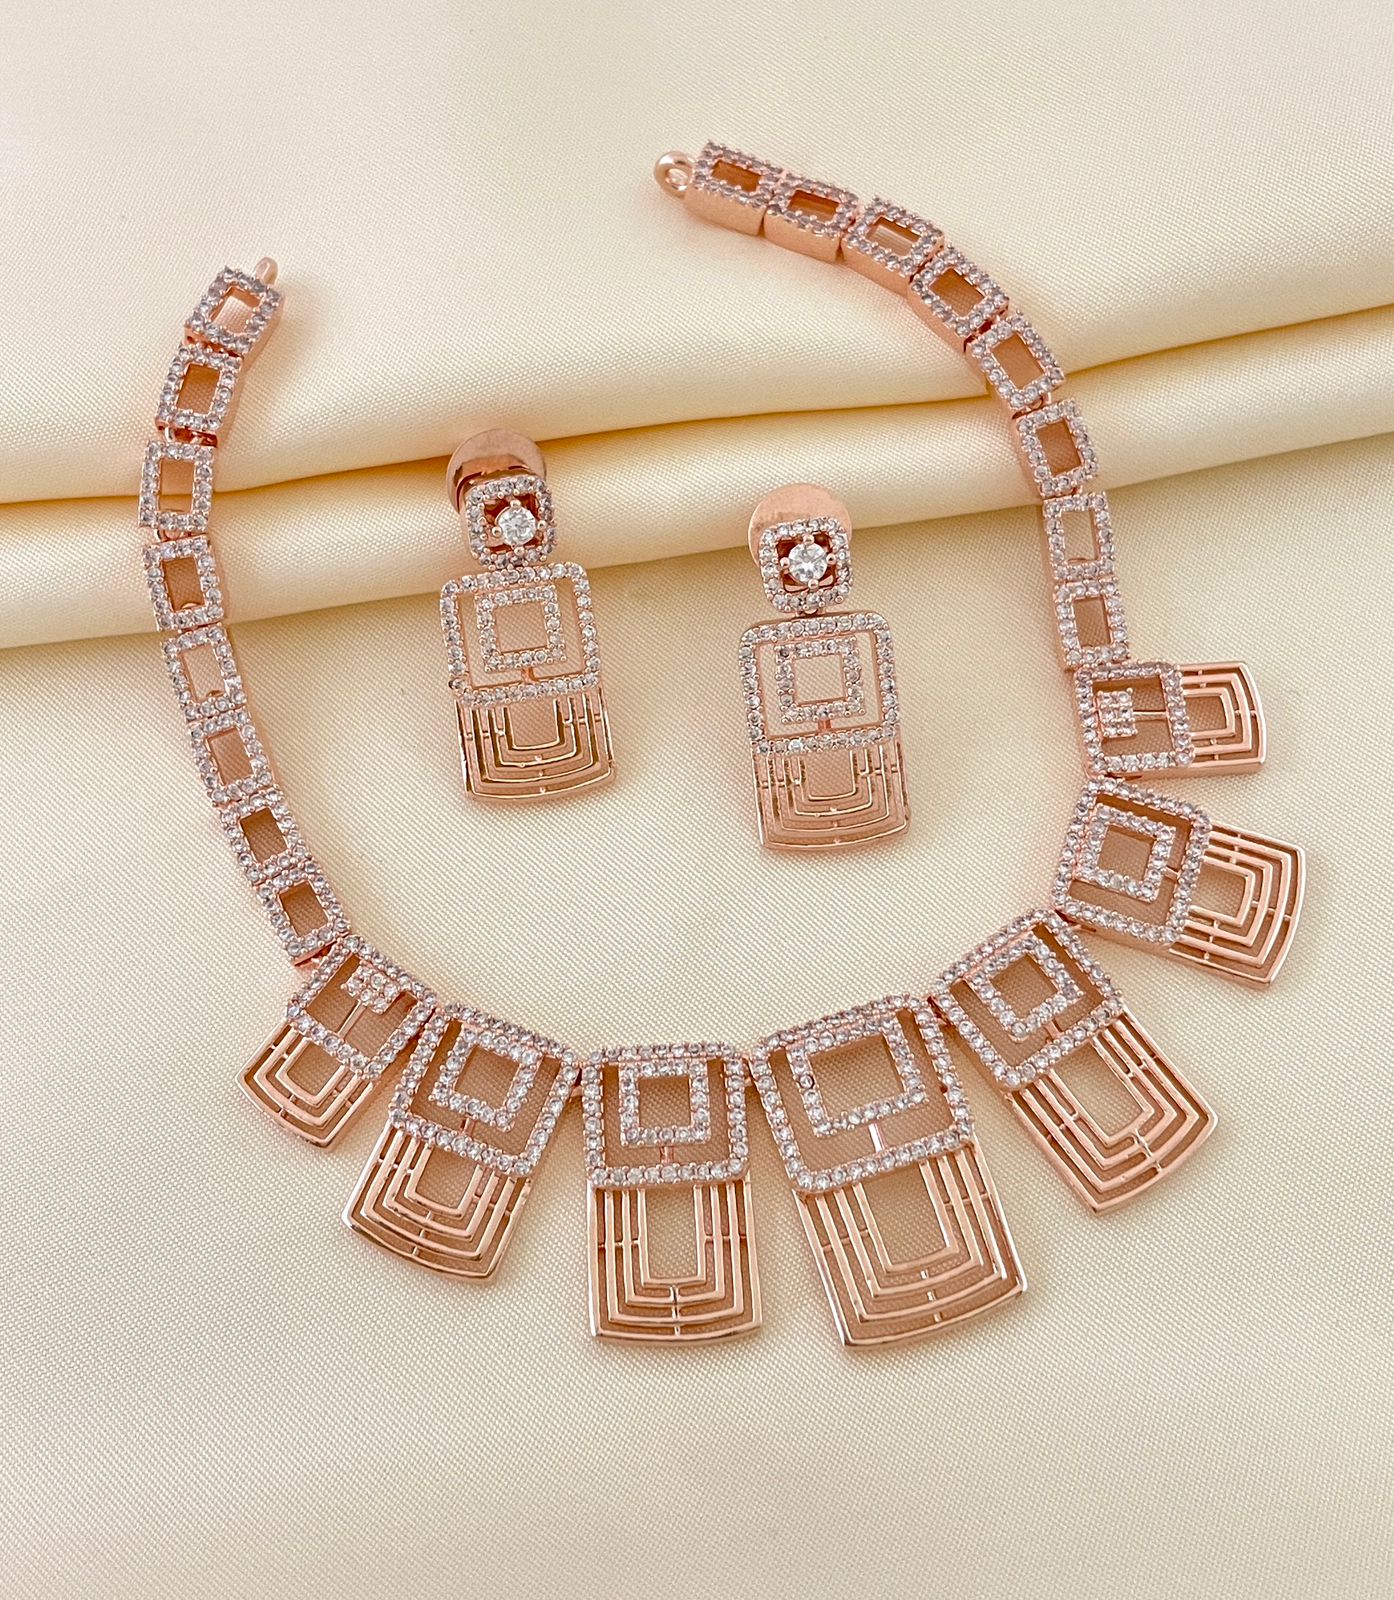 Sparsh Beautiful American Daimond Necklace with Fancy Earrings Rose Gold